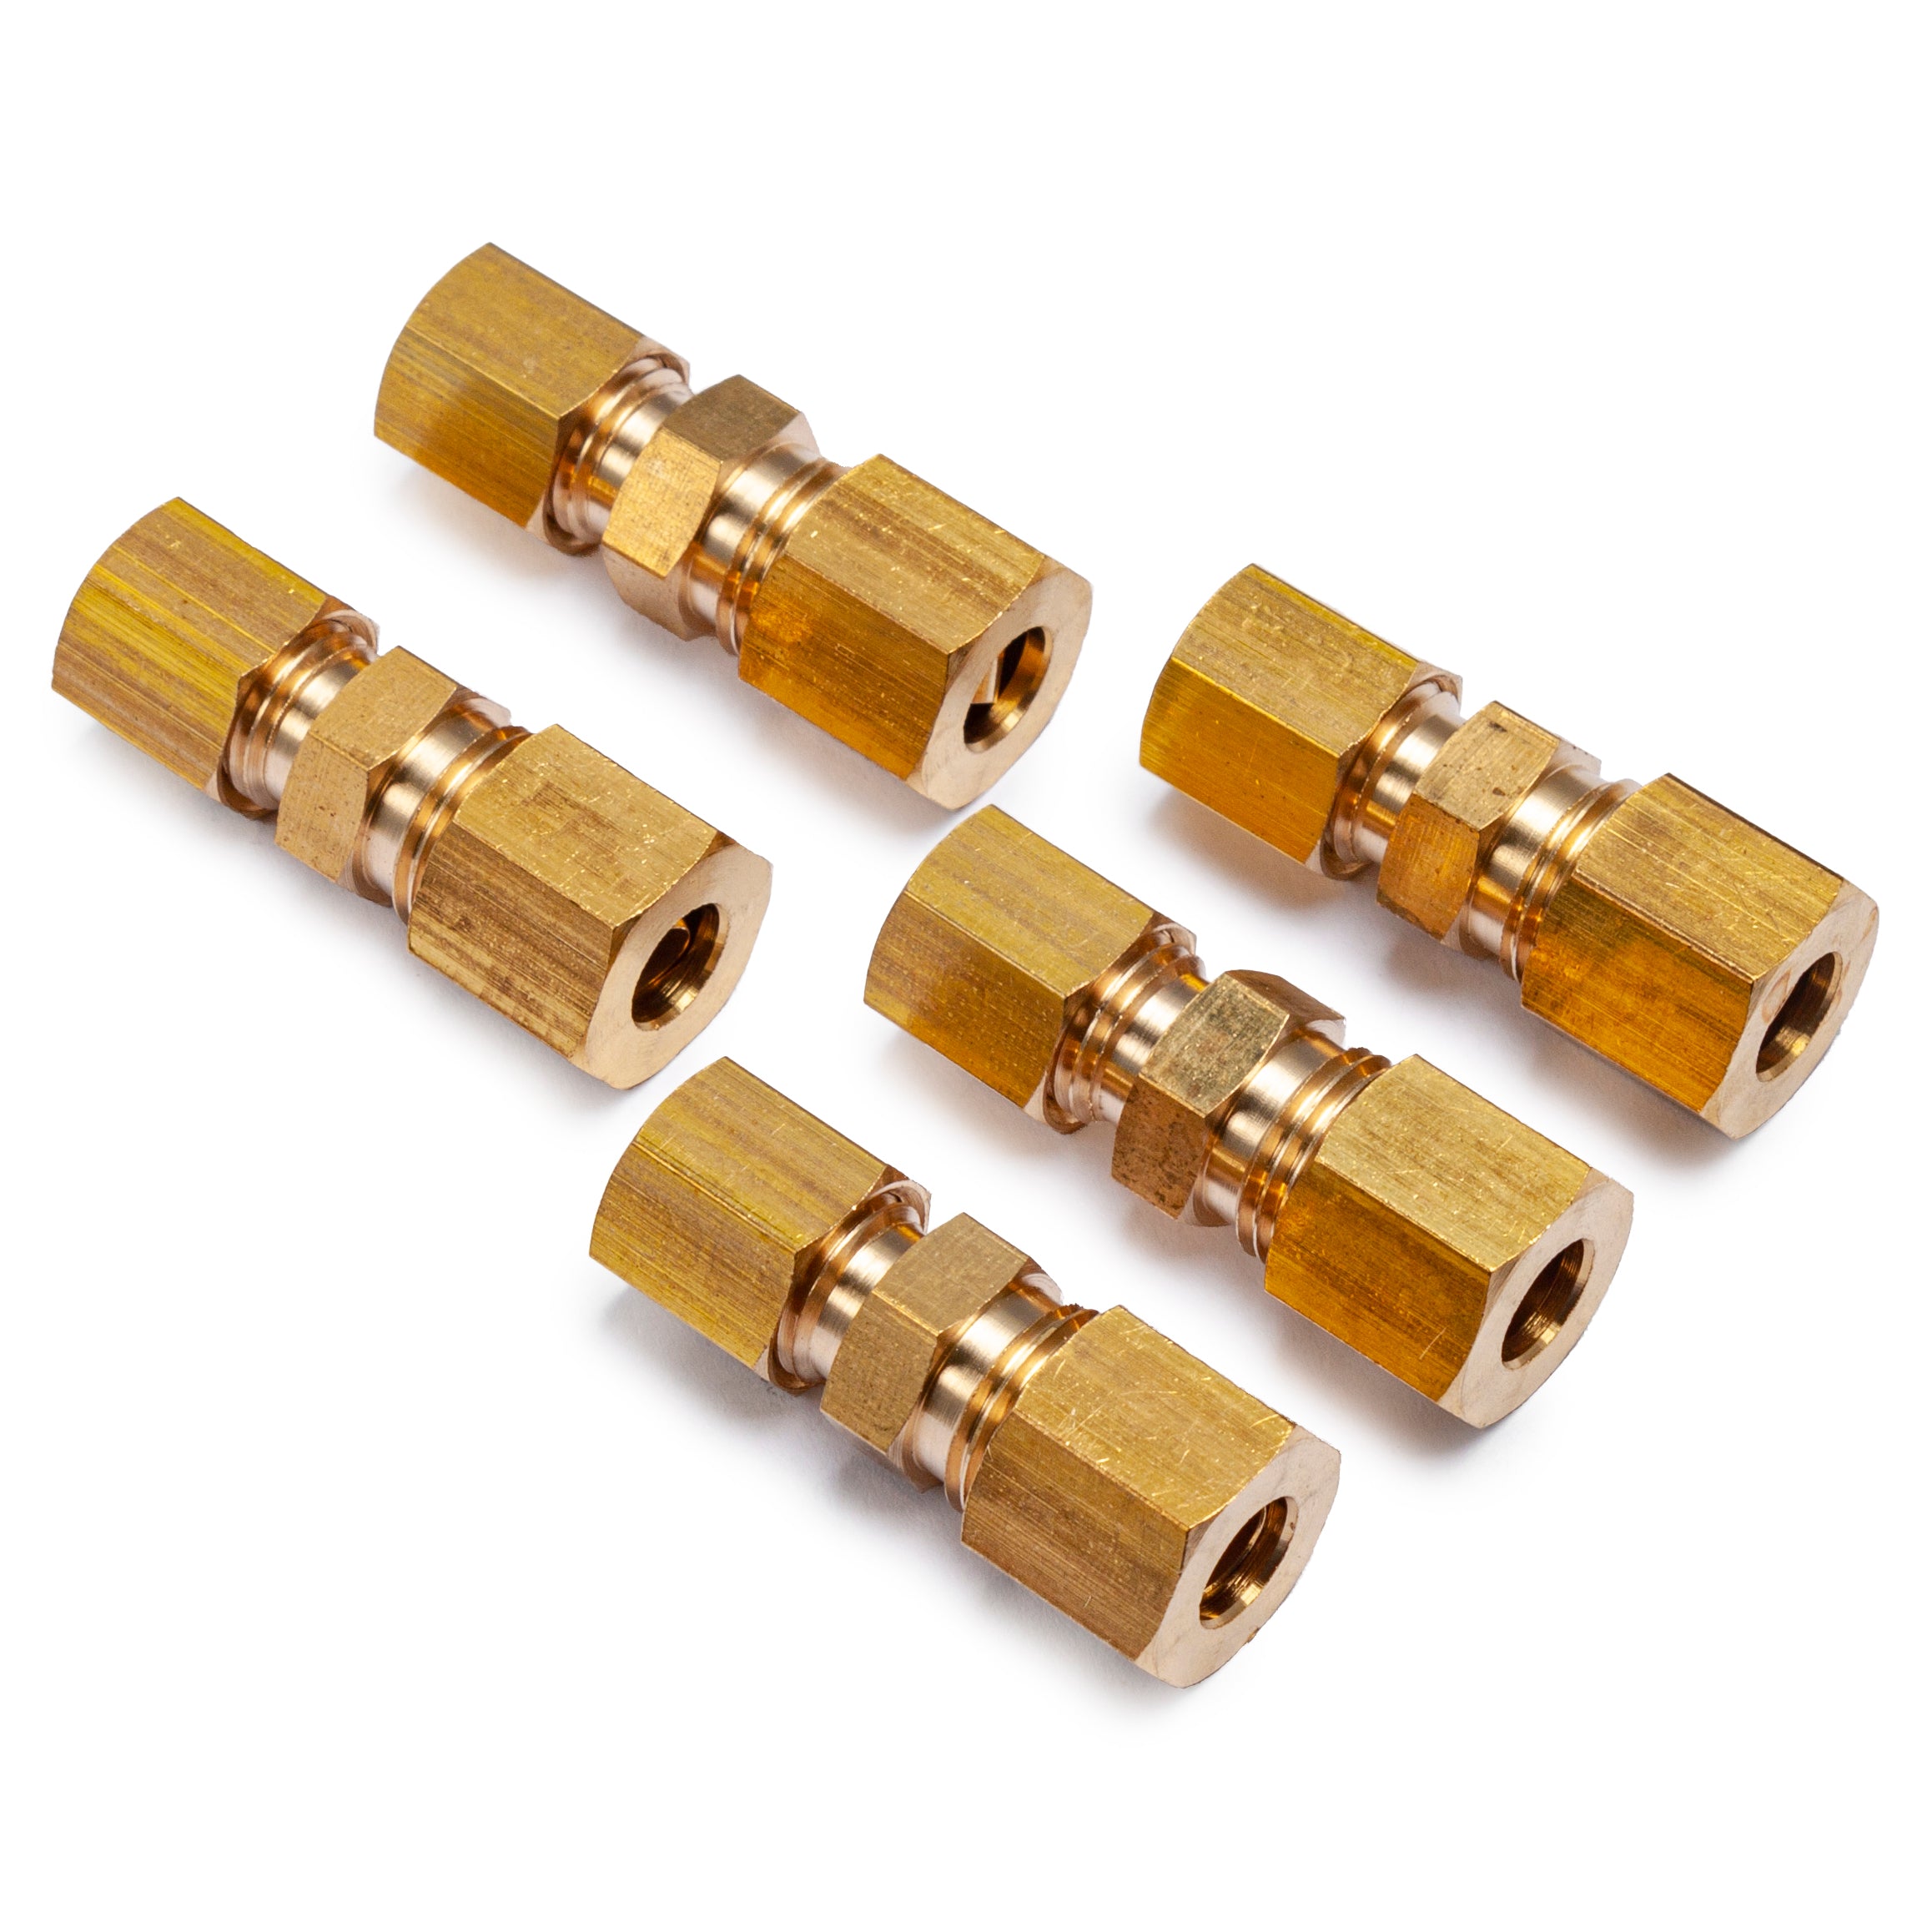 LTWFITTING Compression Reducing Union 3/16-Inch OD x 1/4-Inch OD Brass Fitting (Pack of 5)